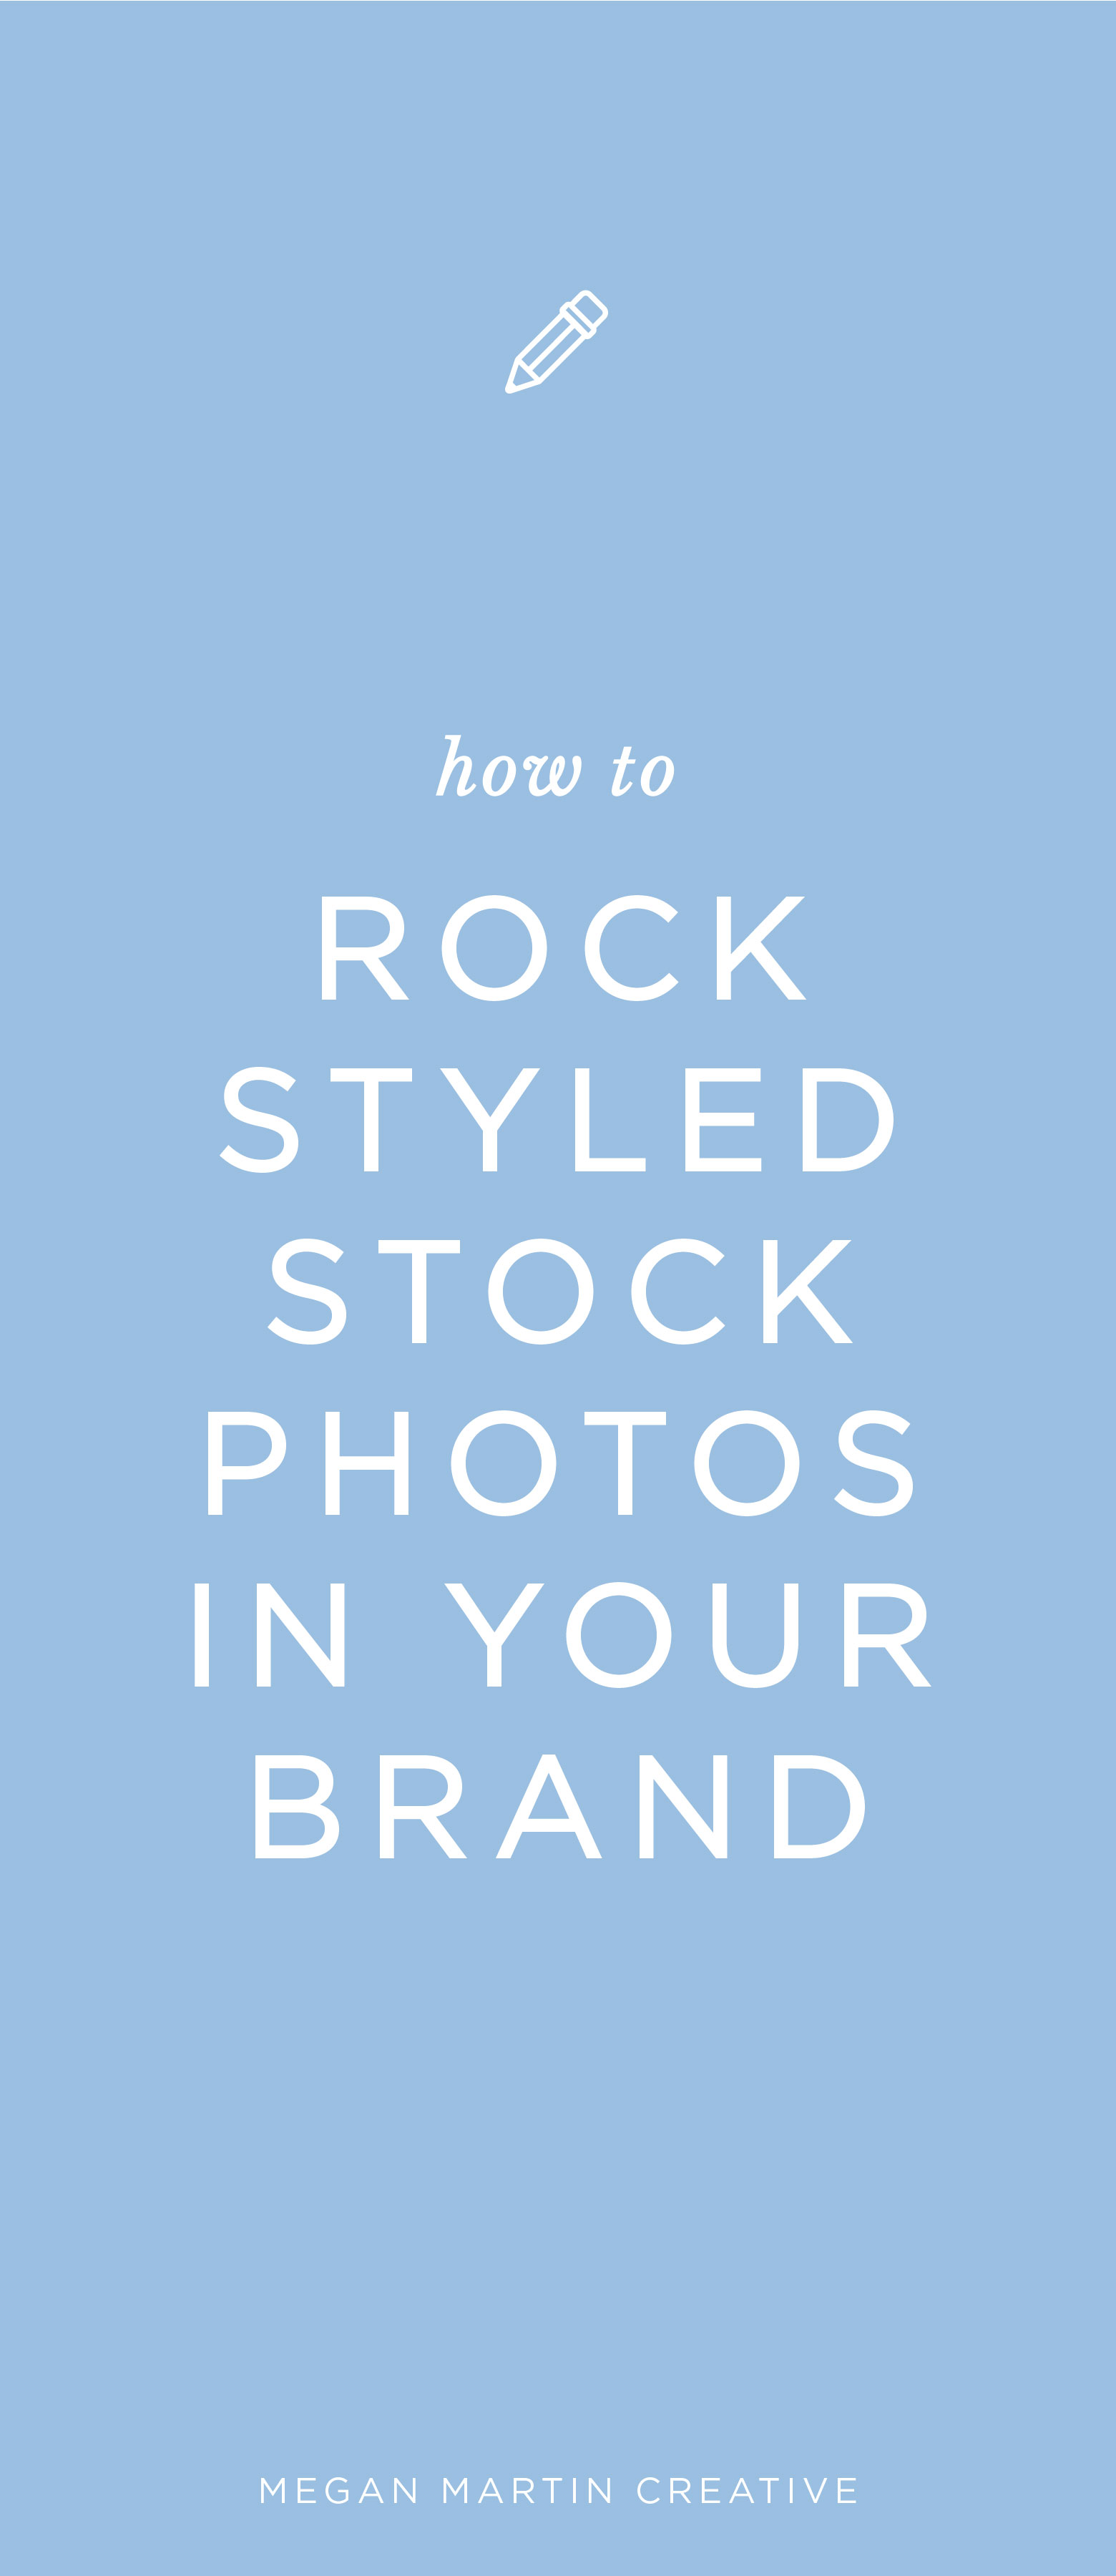 styled stock photography, lifestyle stock photos, branding, brand photography